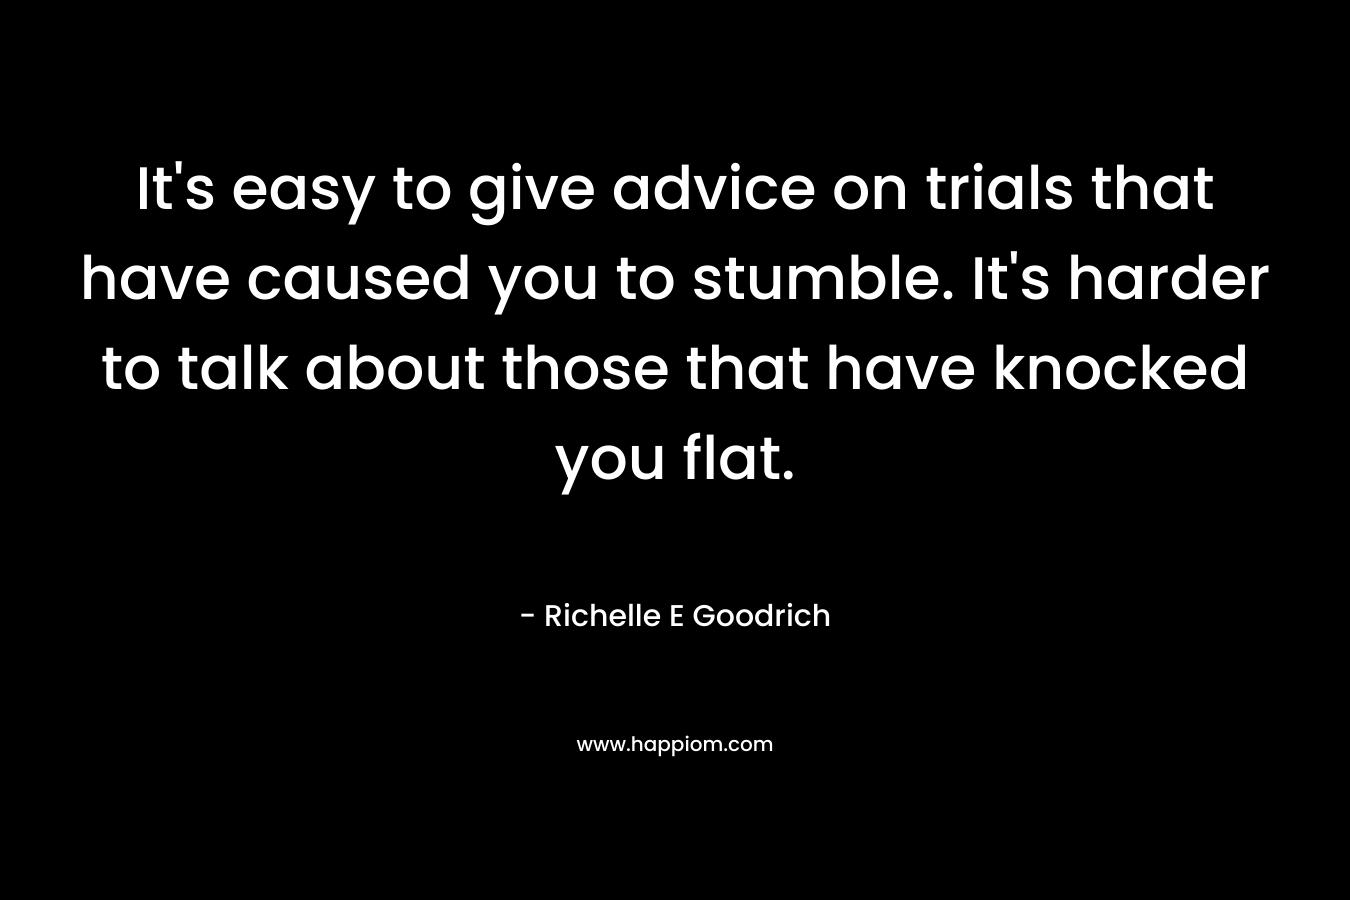 It's easy to give advice on trials that have caused you to stumble. It's harder to talk about those that have knocked you flat.